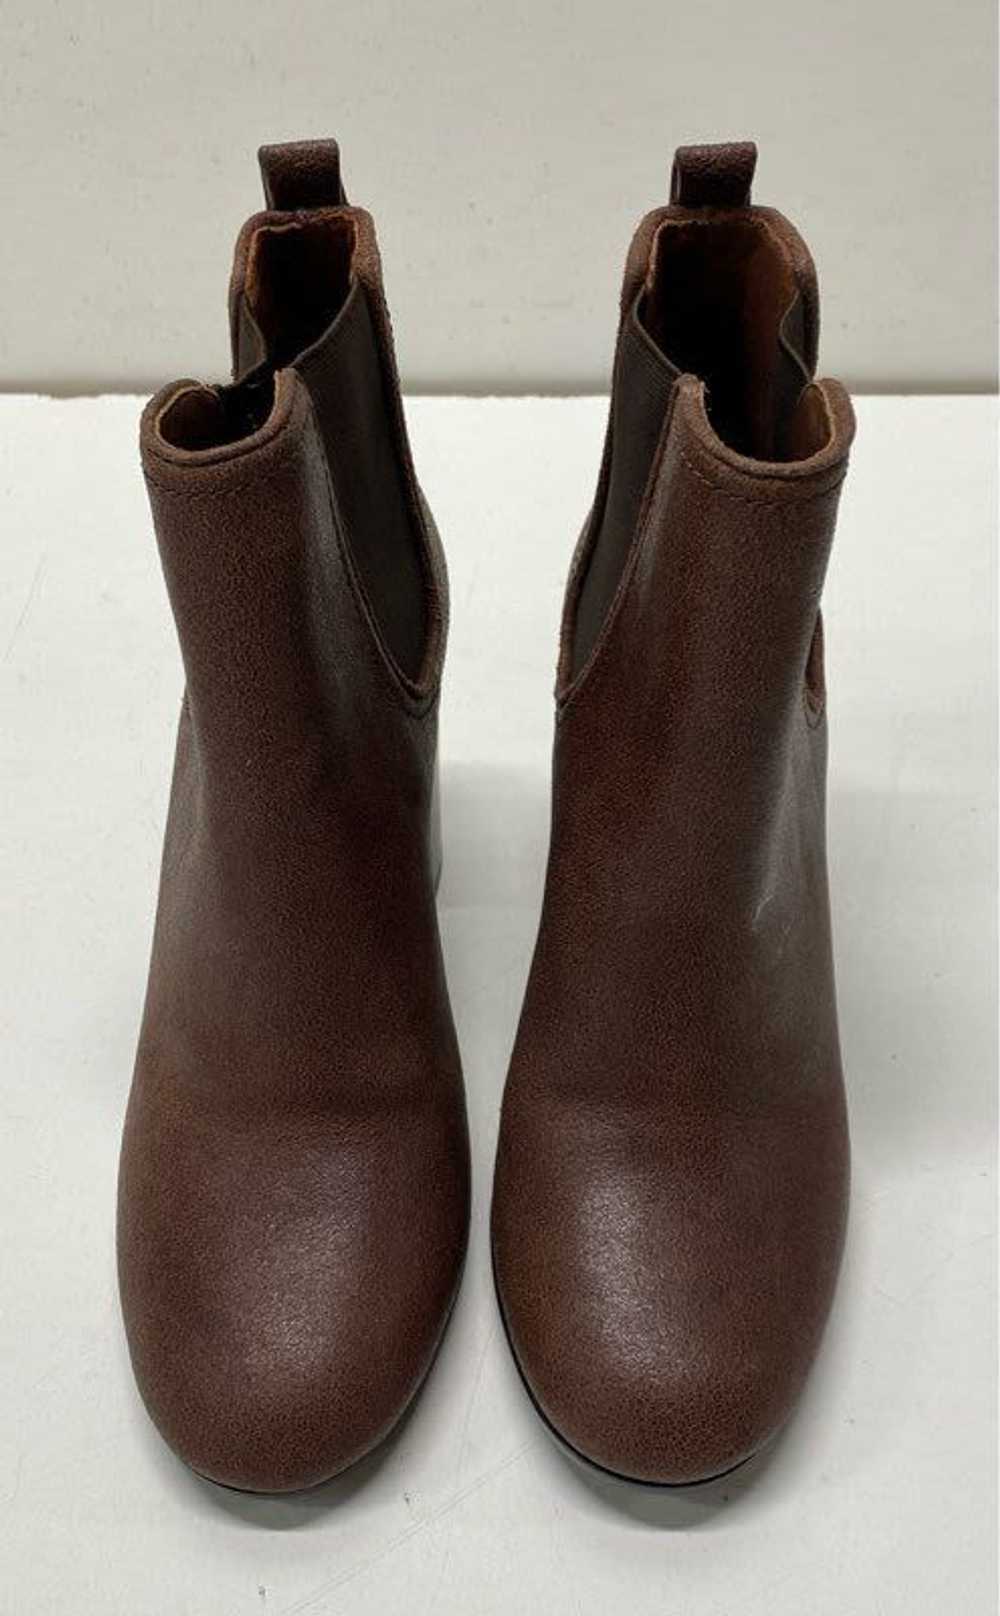 Tory Burch Margaux Leather Ankle Bootie Brown 6.5 - image 5